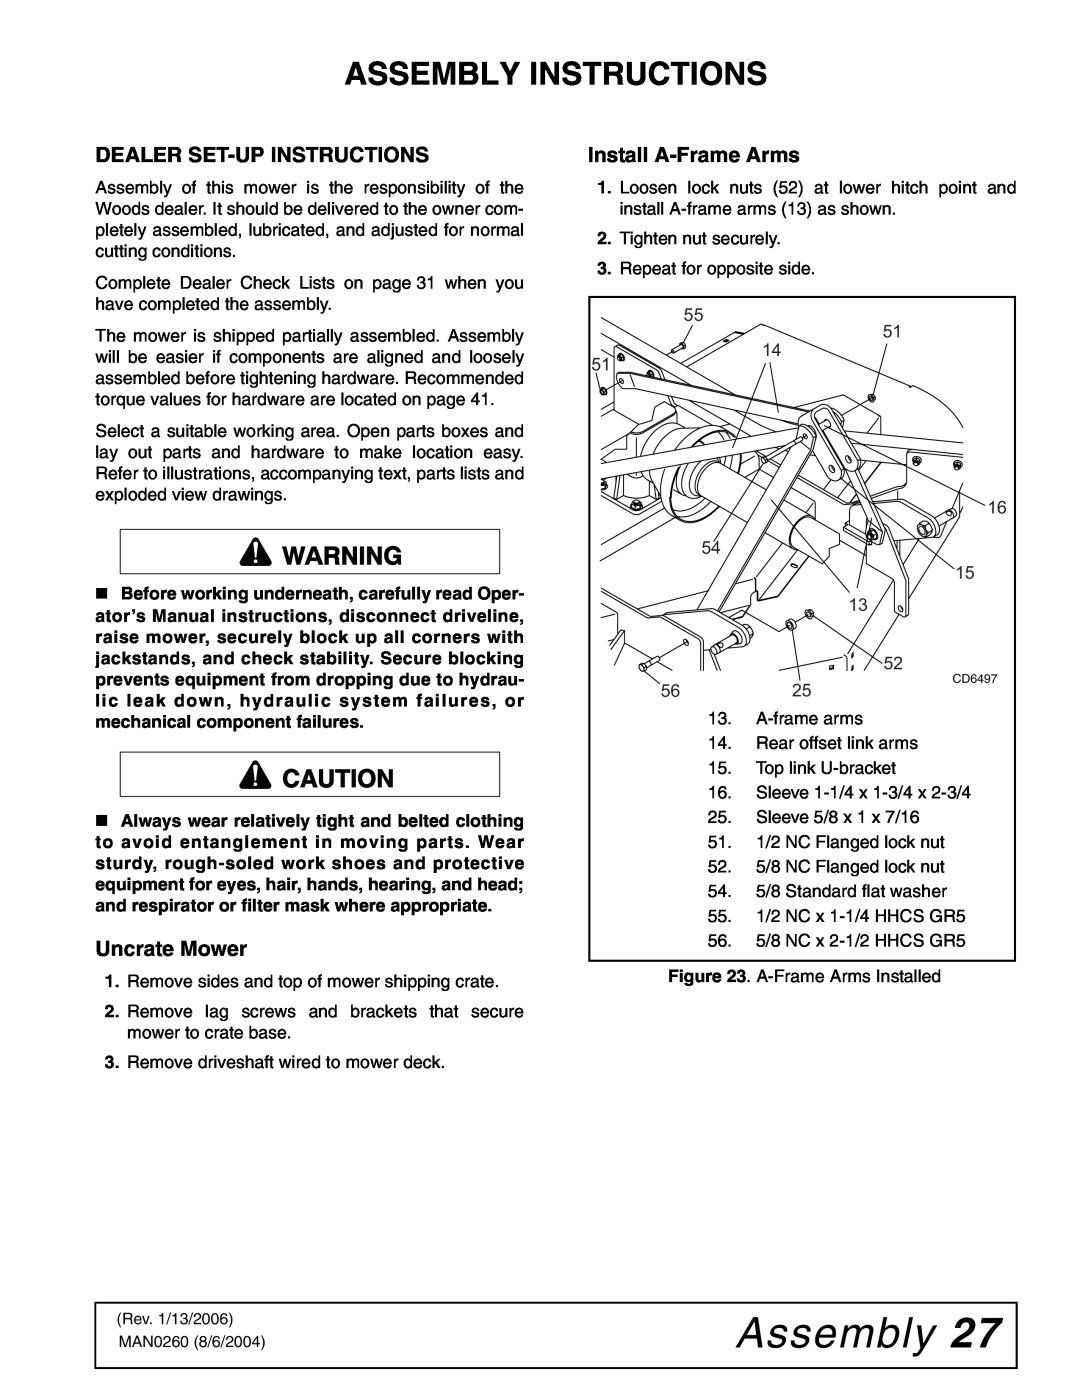 Woods Equipment RDC54, RD60, RD72 manual Assembly Instructions, Dealer Set-Up Instructions, Uncrate Mower 